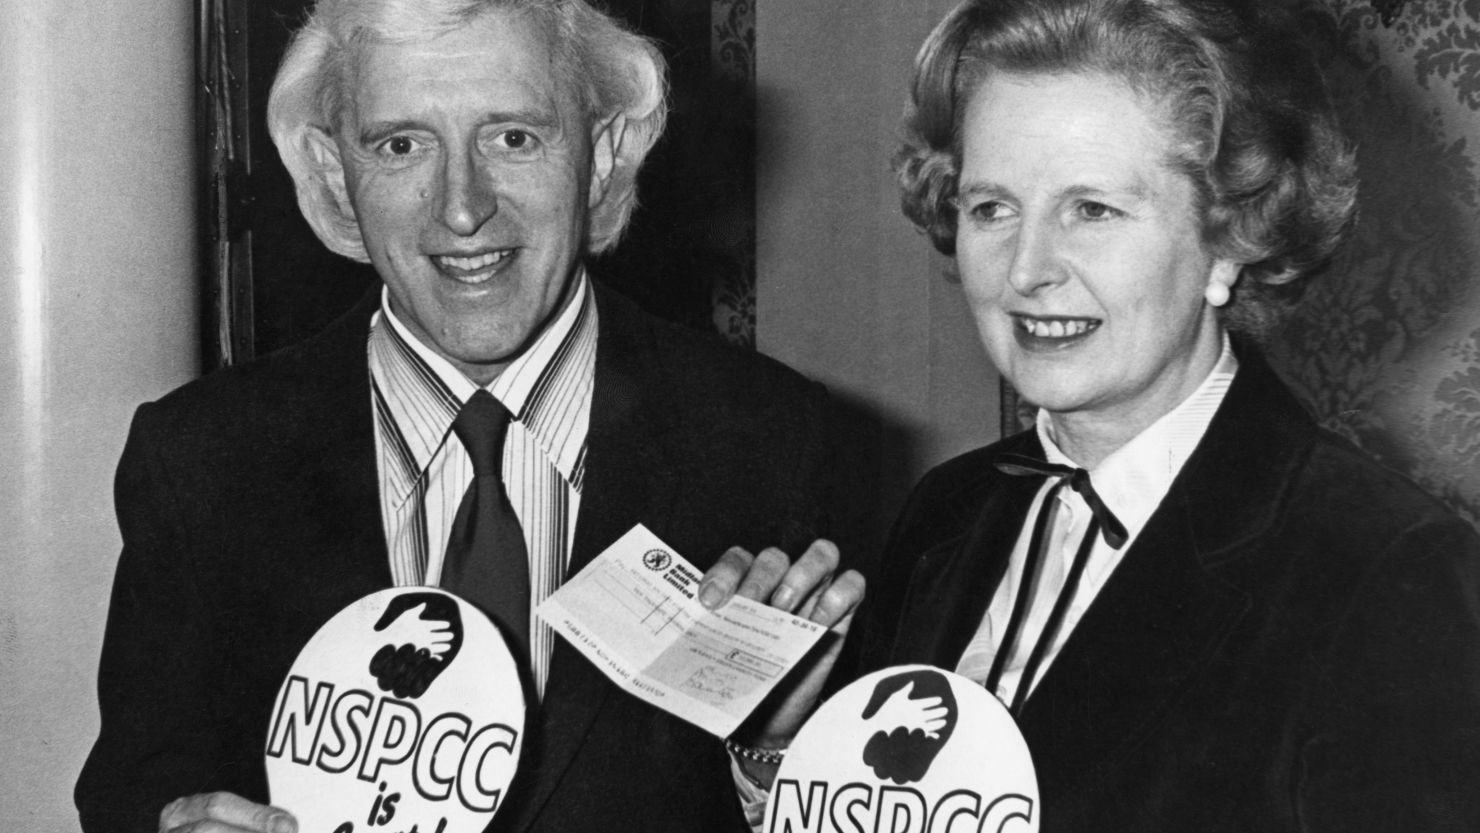 Former British Prime Minister Margaret Thatcher pictured in 1980 with TV host Jimmy Savile.